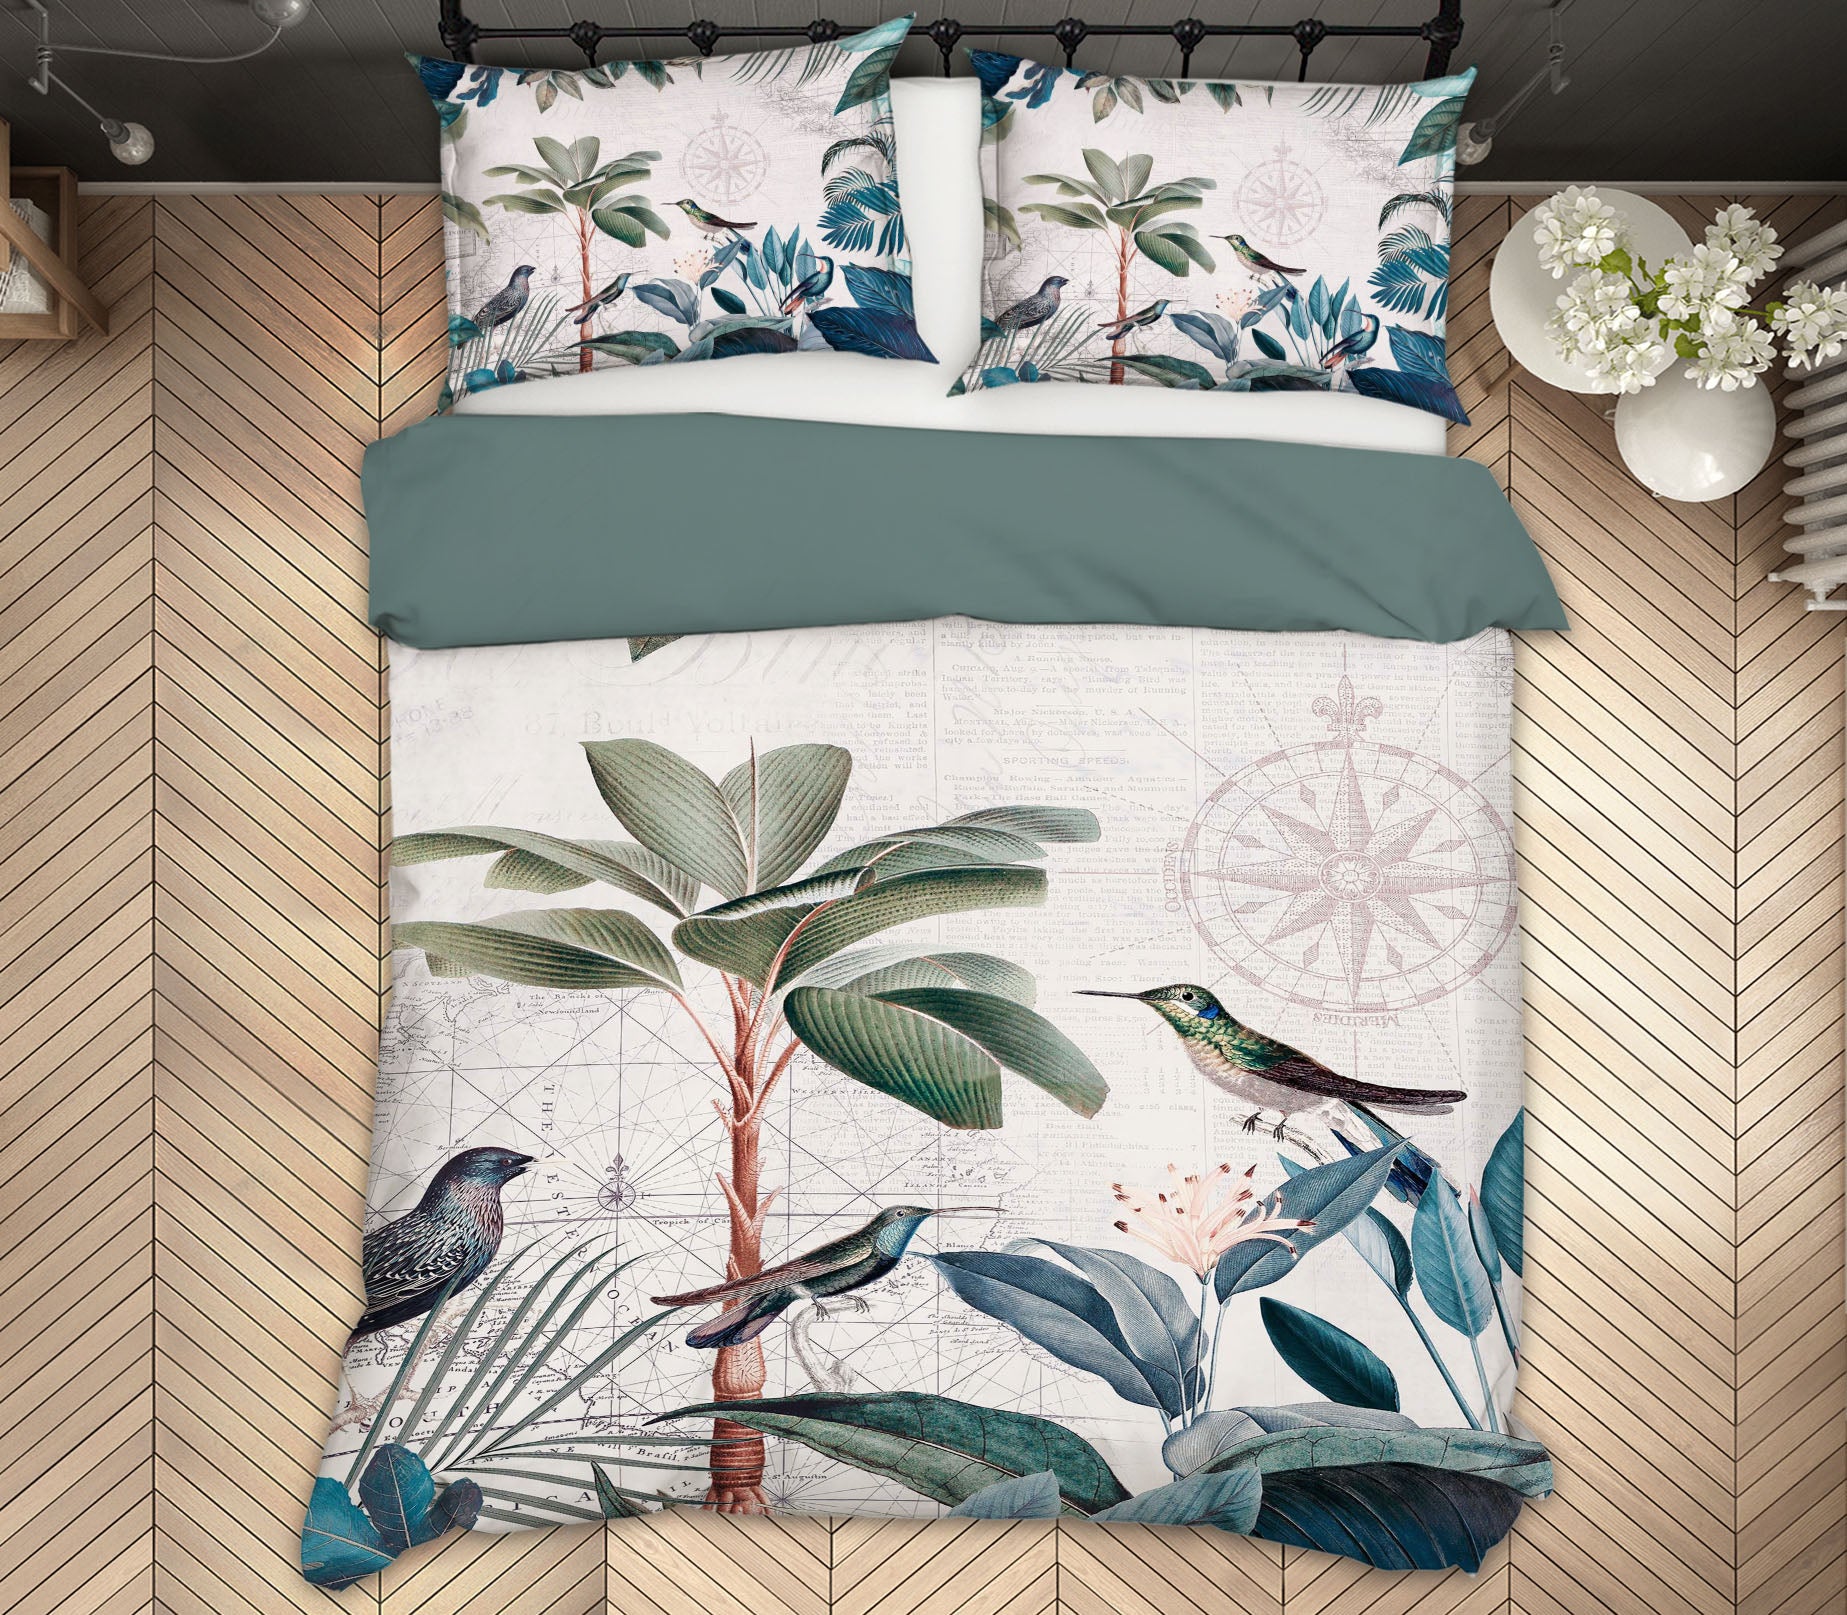 3D Birds Playing 123 Andrea haase Bedding Bed Pillowcases Quilt